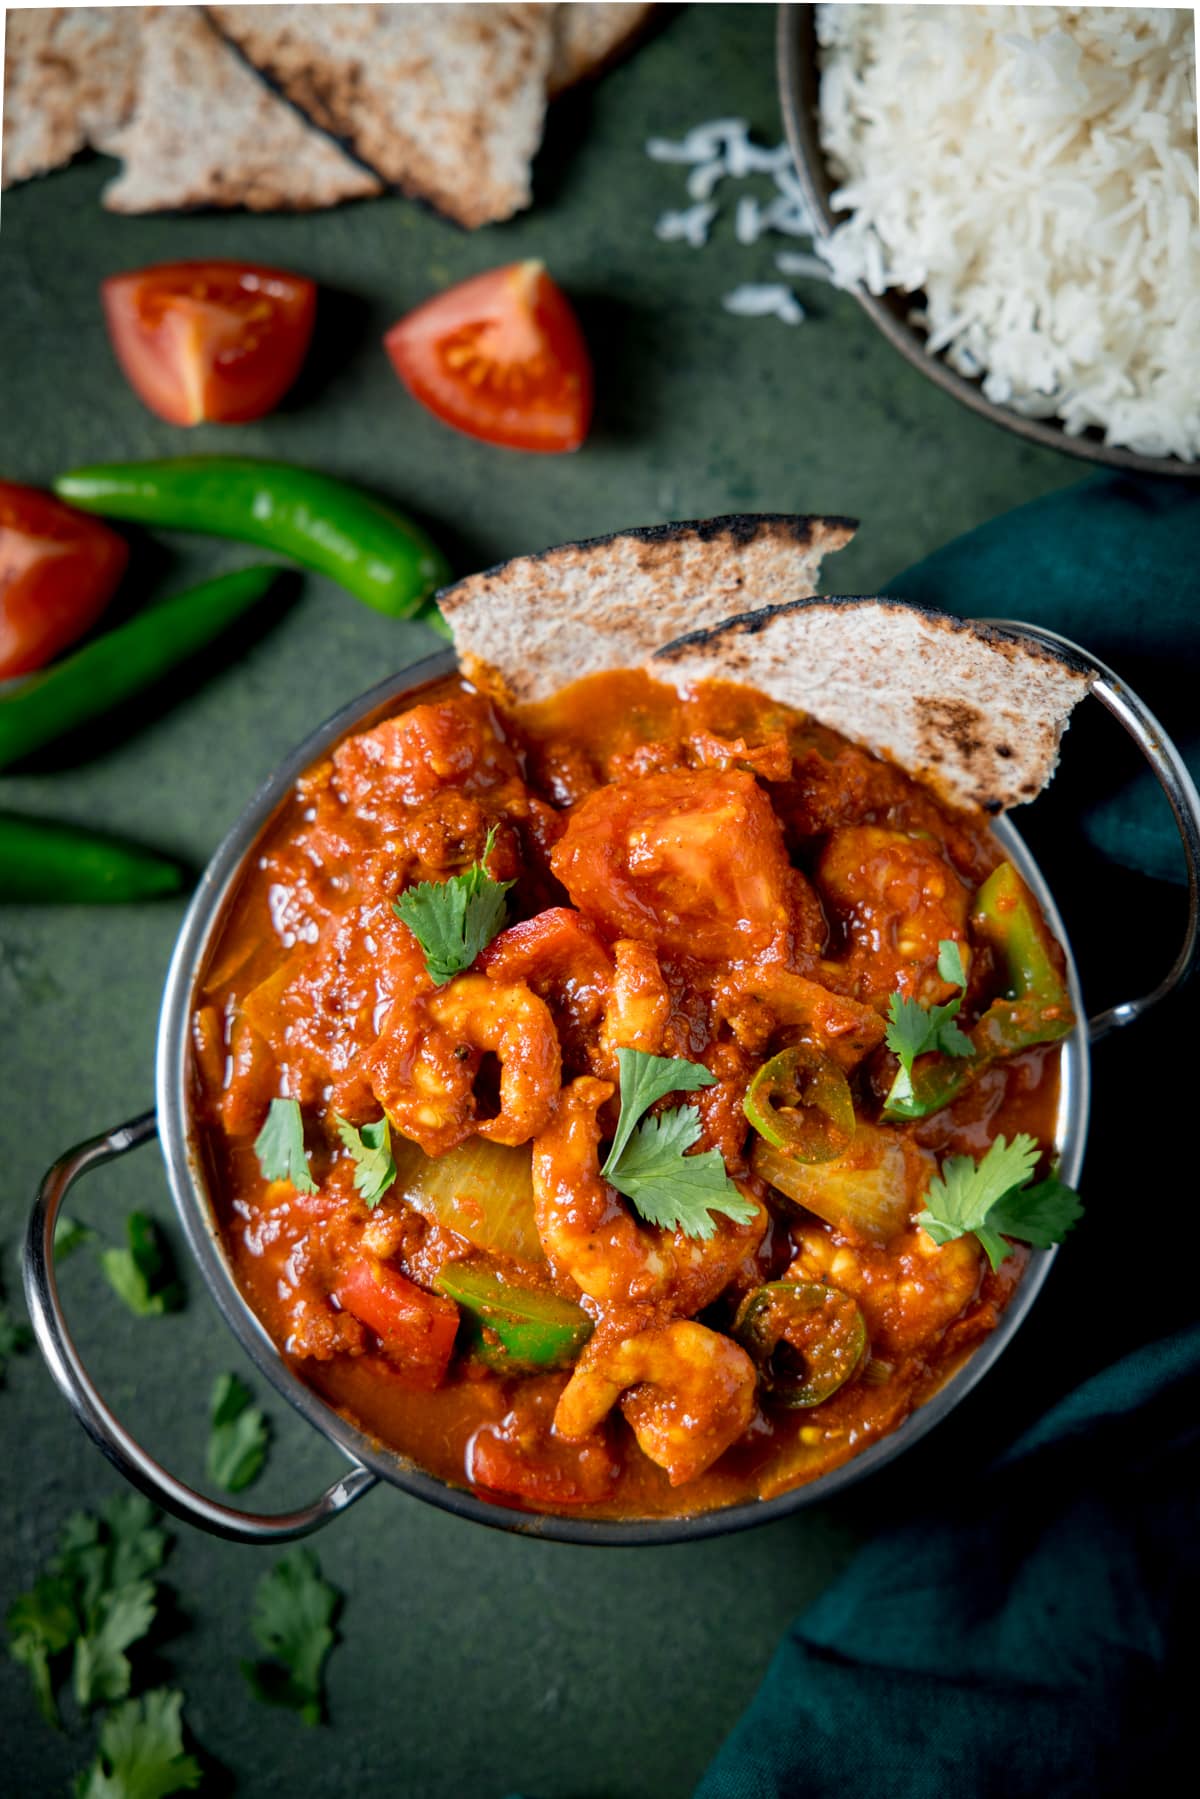 Overhead picture of a prawn balti in a silver balti dish on a green background with some rice and toasted chapati in the background.